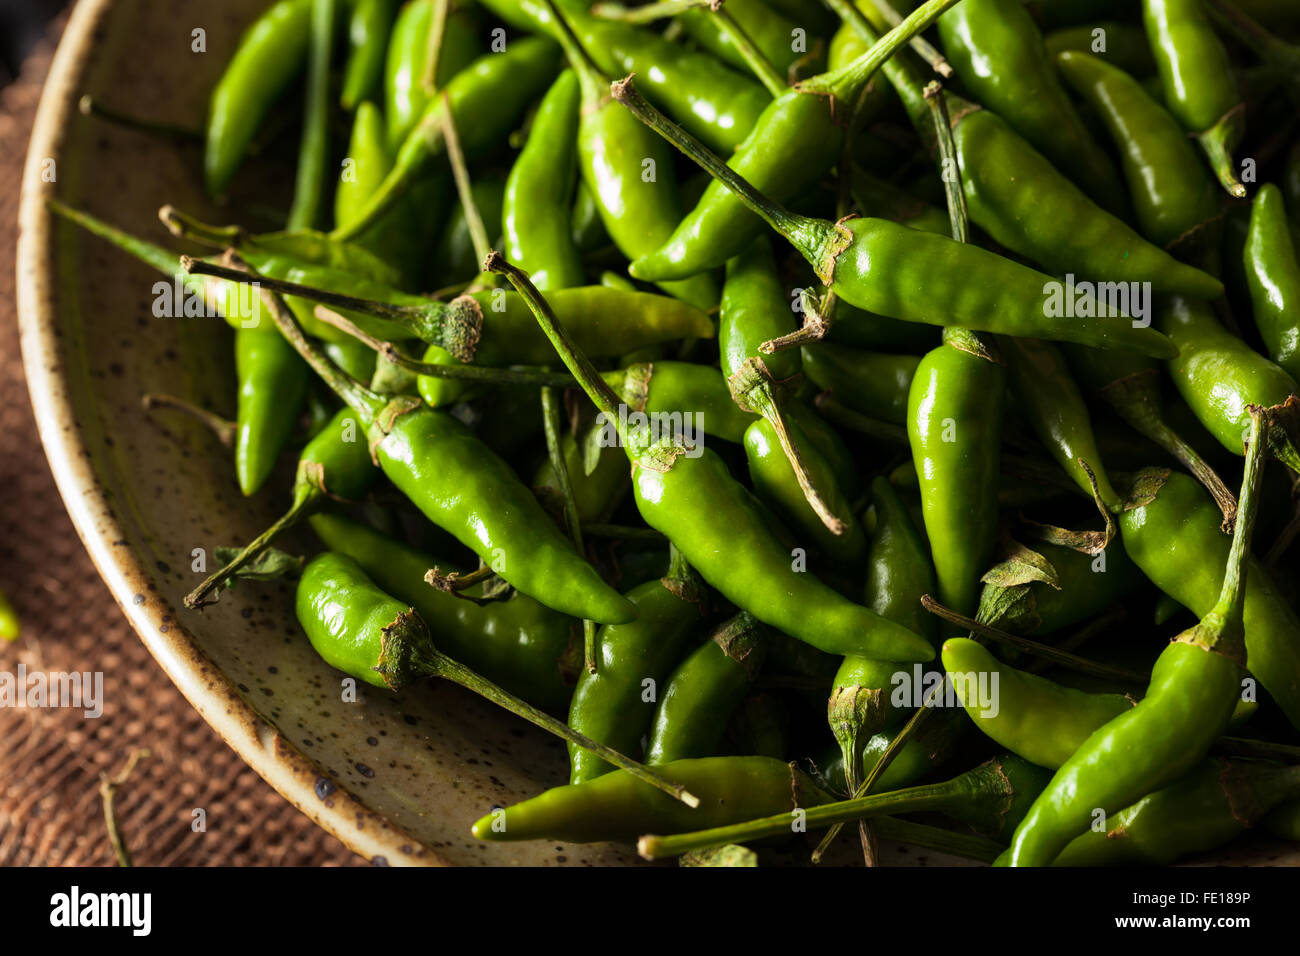 Hot Green Thai Chili Pepper in a Bowl Stock Photo